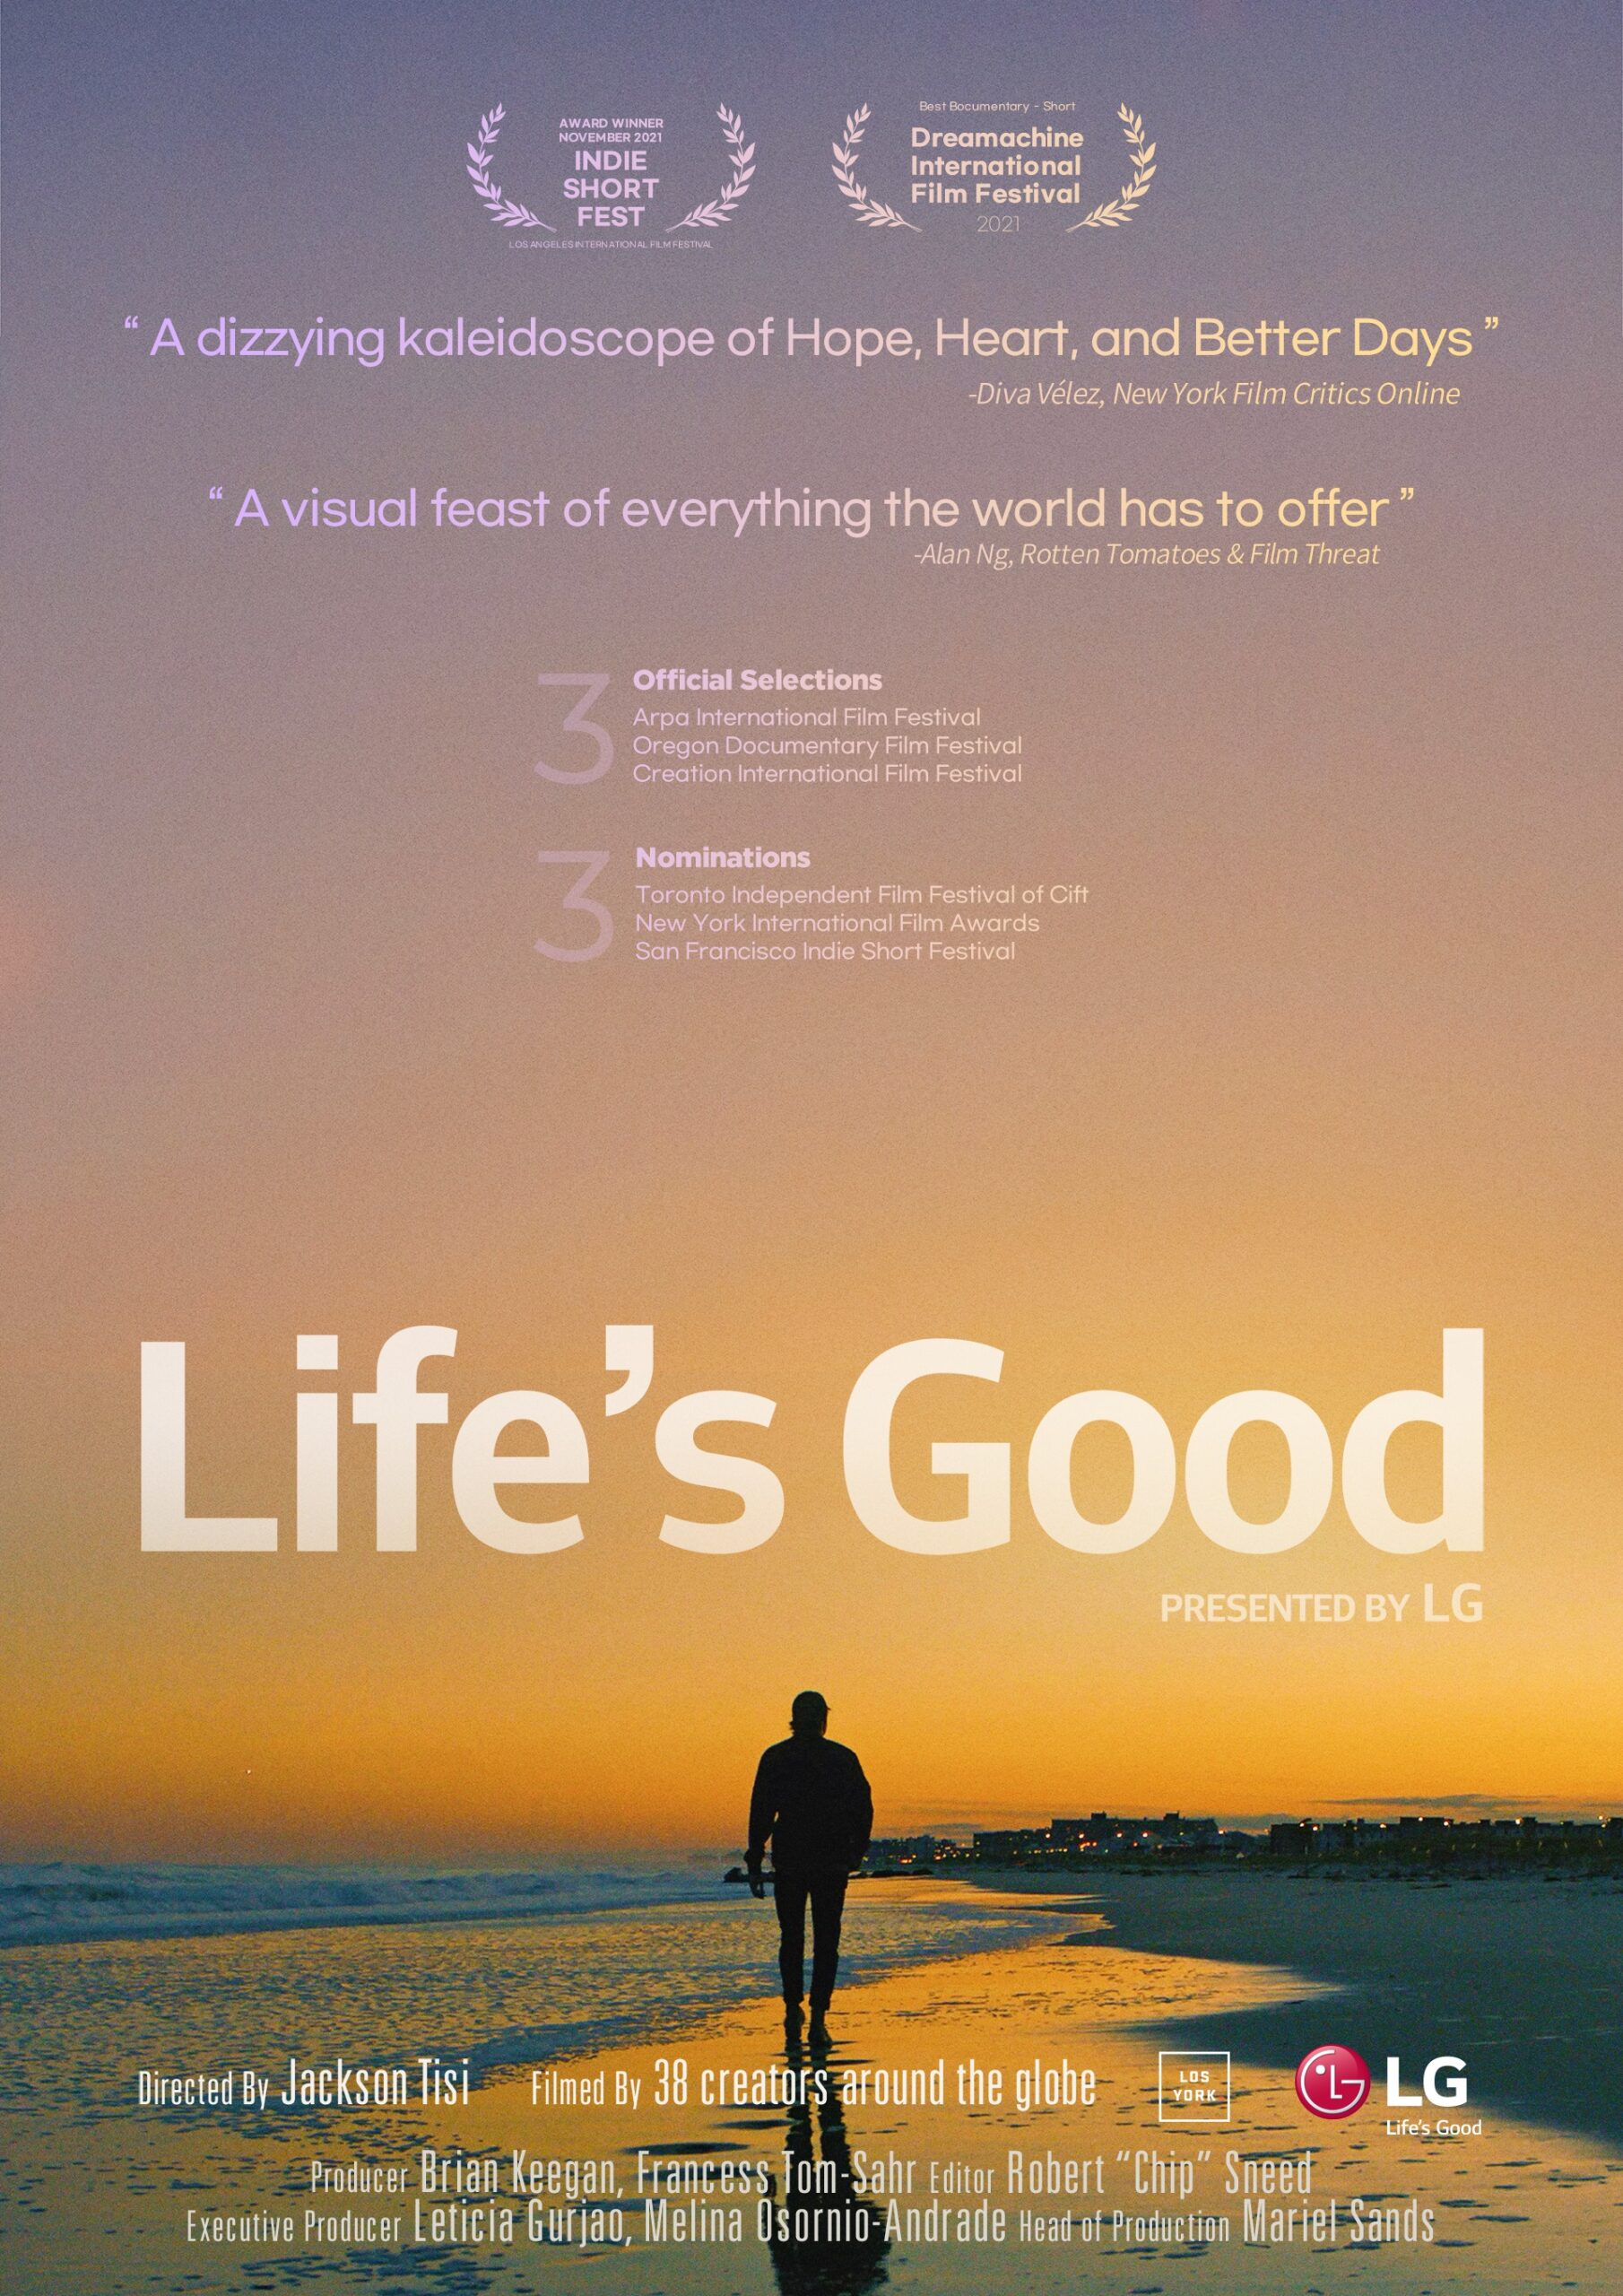 2021 Life’s Good Film Project with Jackson Tisi.

Life’s Good Film Poster with Film Festival Awards